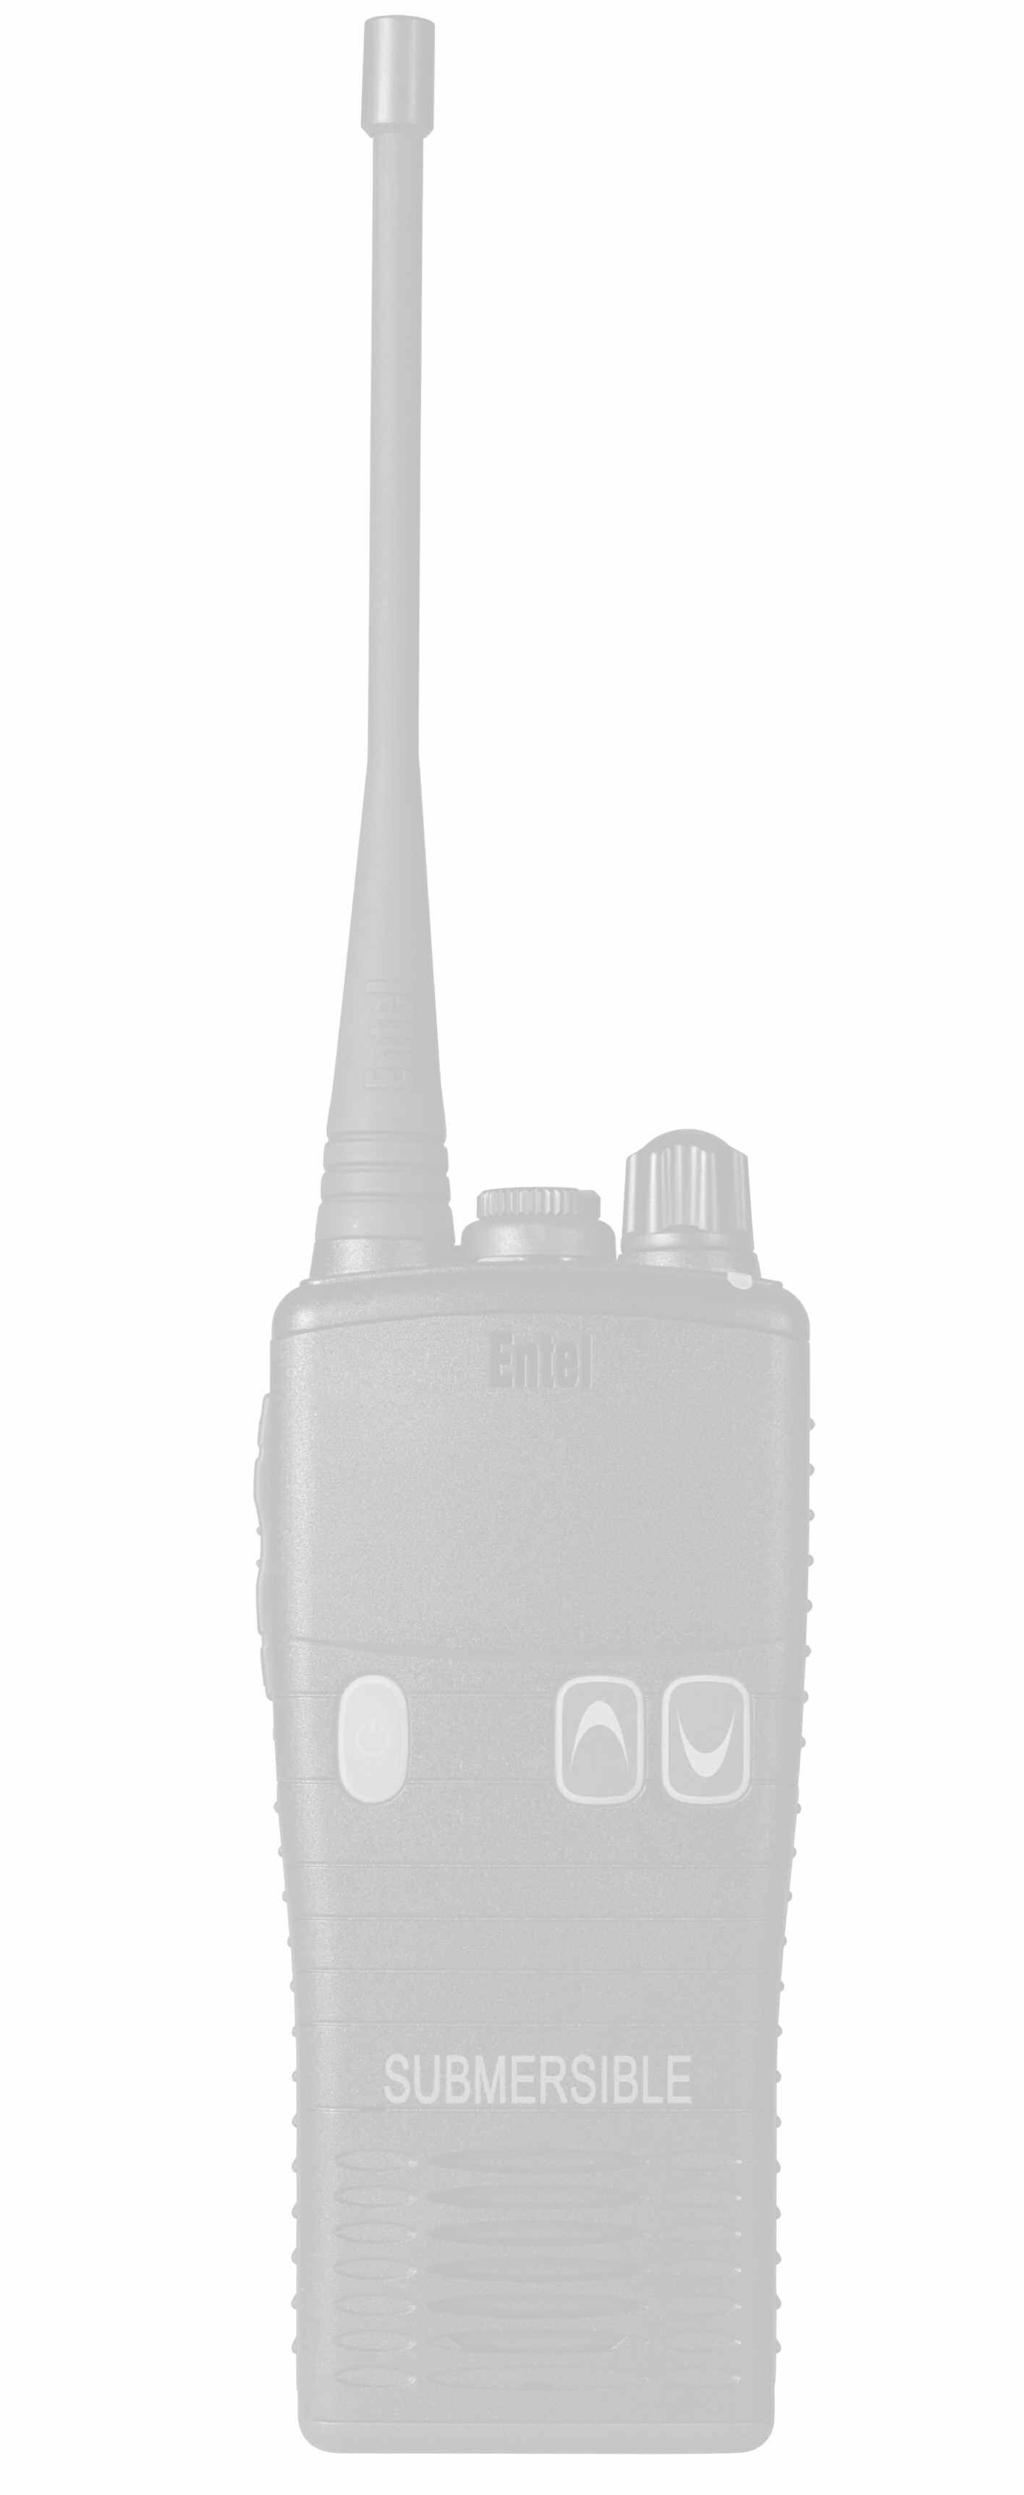 HT952 Standard Features: Up to 16 programmable channel positions Transmit power output 0.